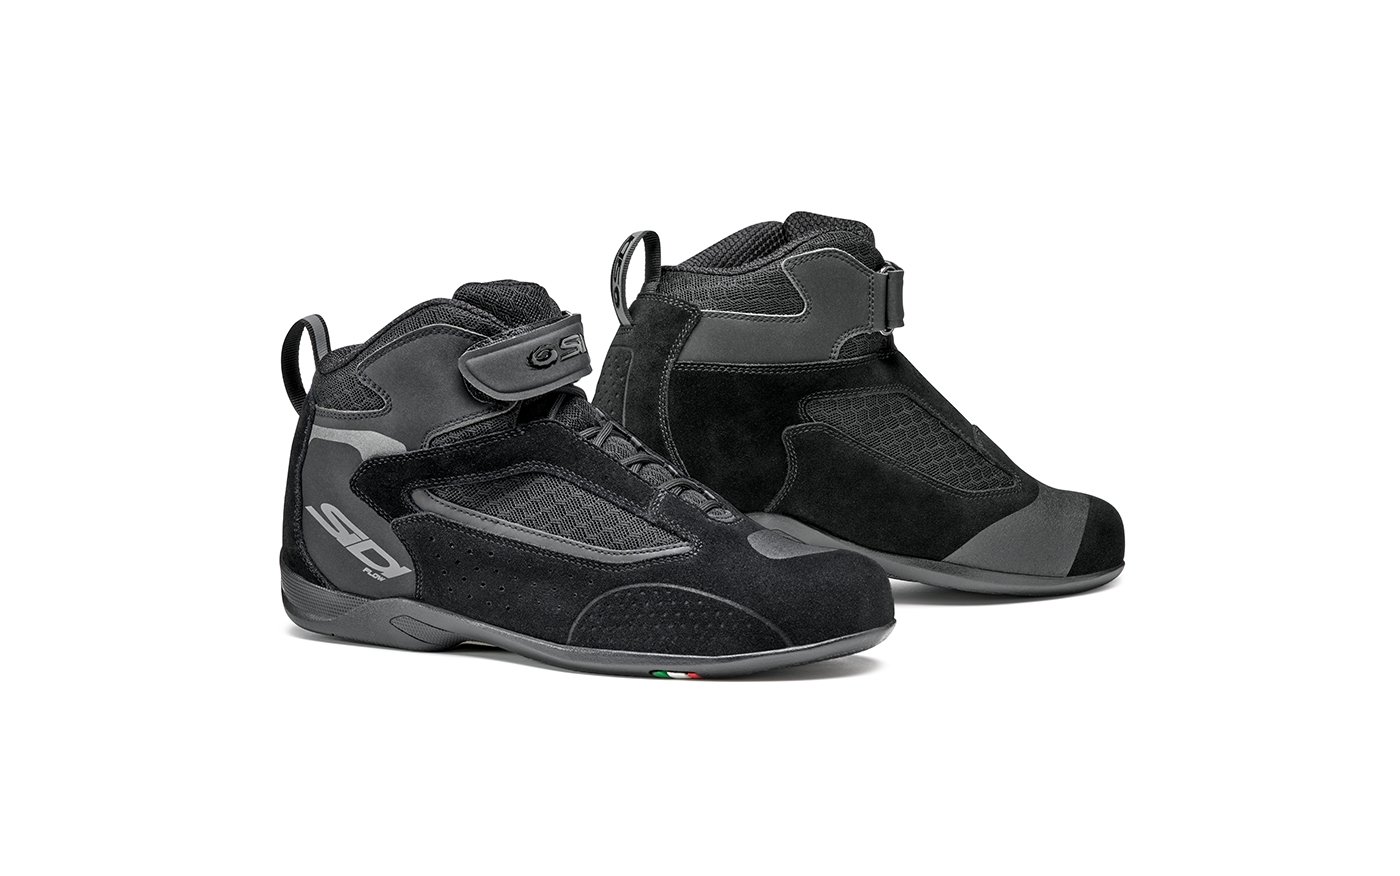 Image of EU Sidi Gas 2 Flow Noir Chaussures Taille 41